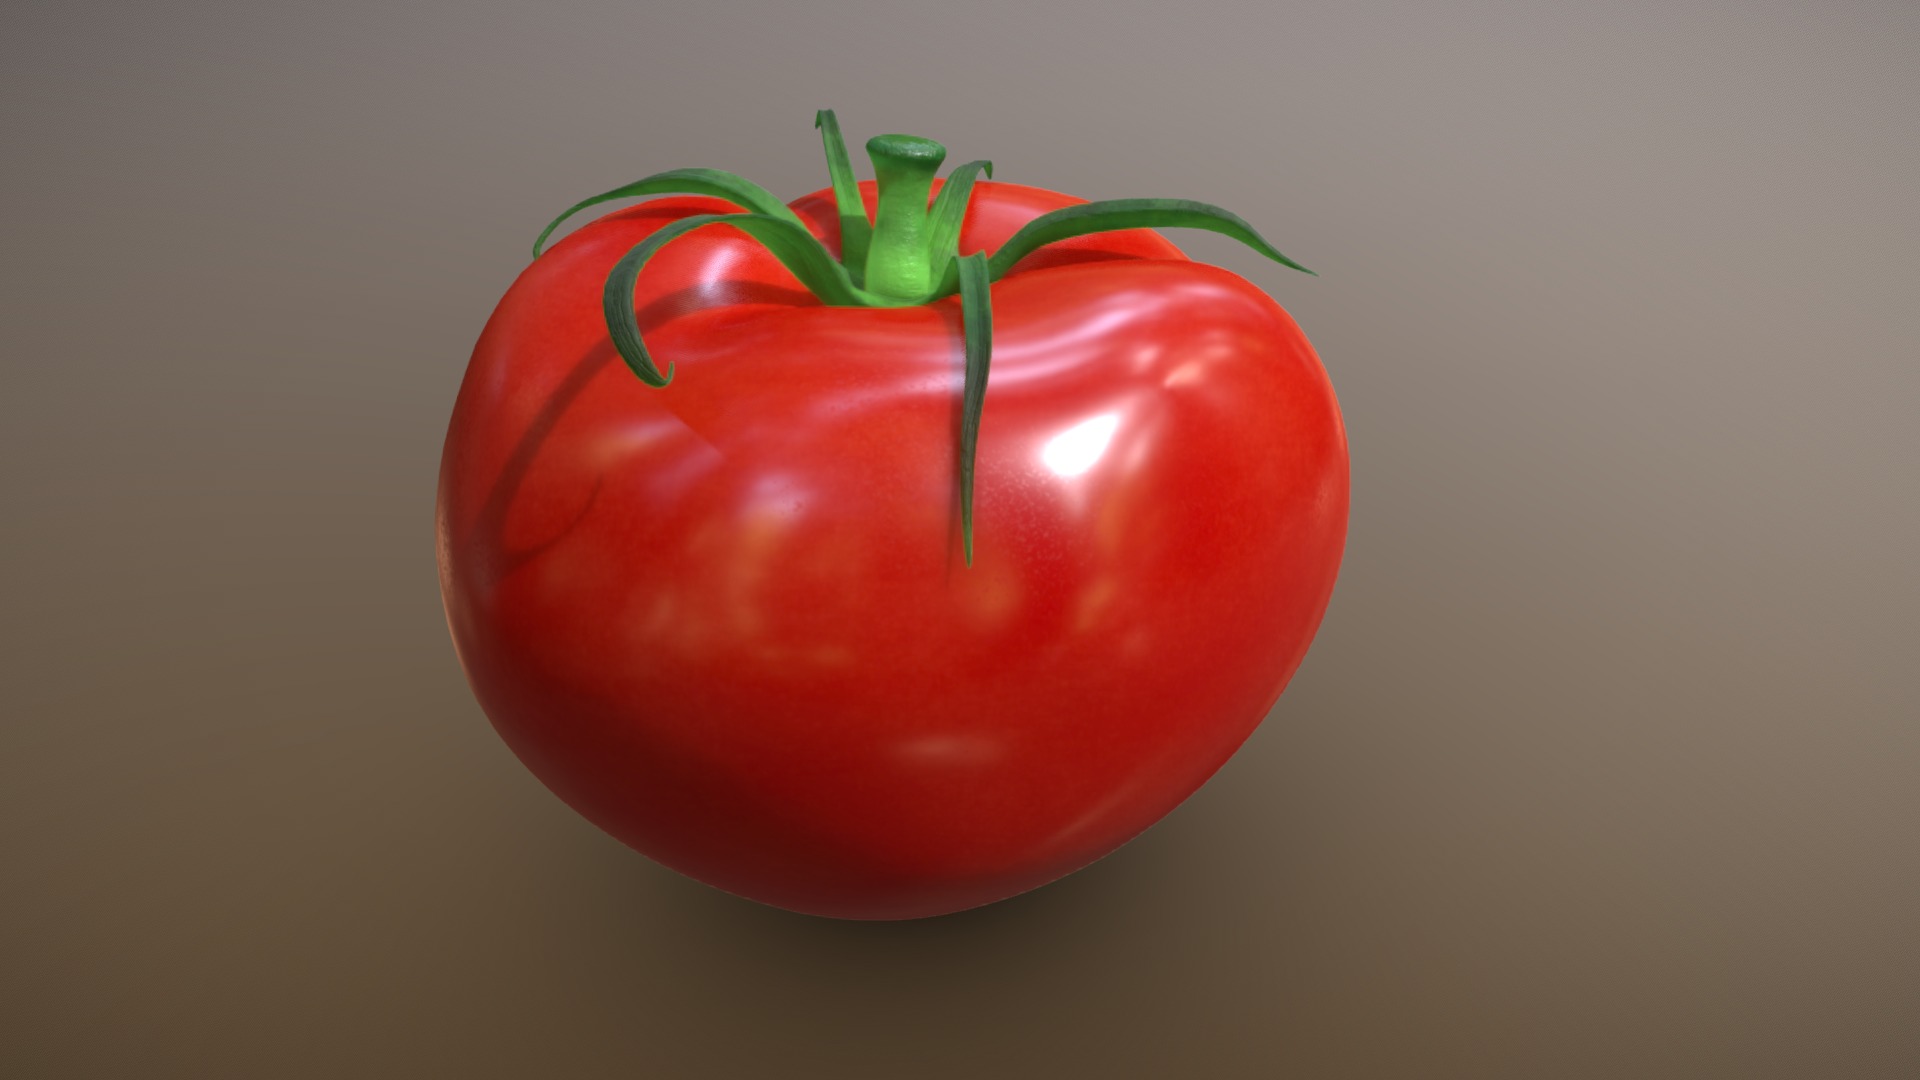 3D model Tomato - This is a 3D model of the Tomato. The 3D model is about a red tomato with green stems.